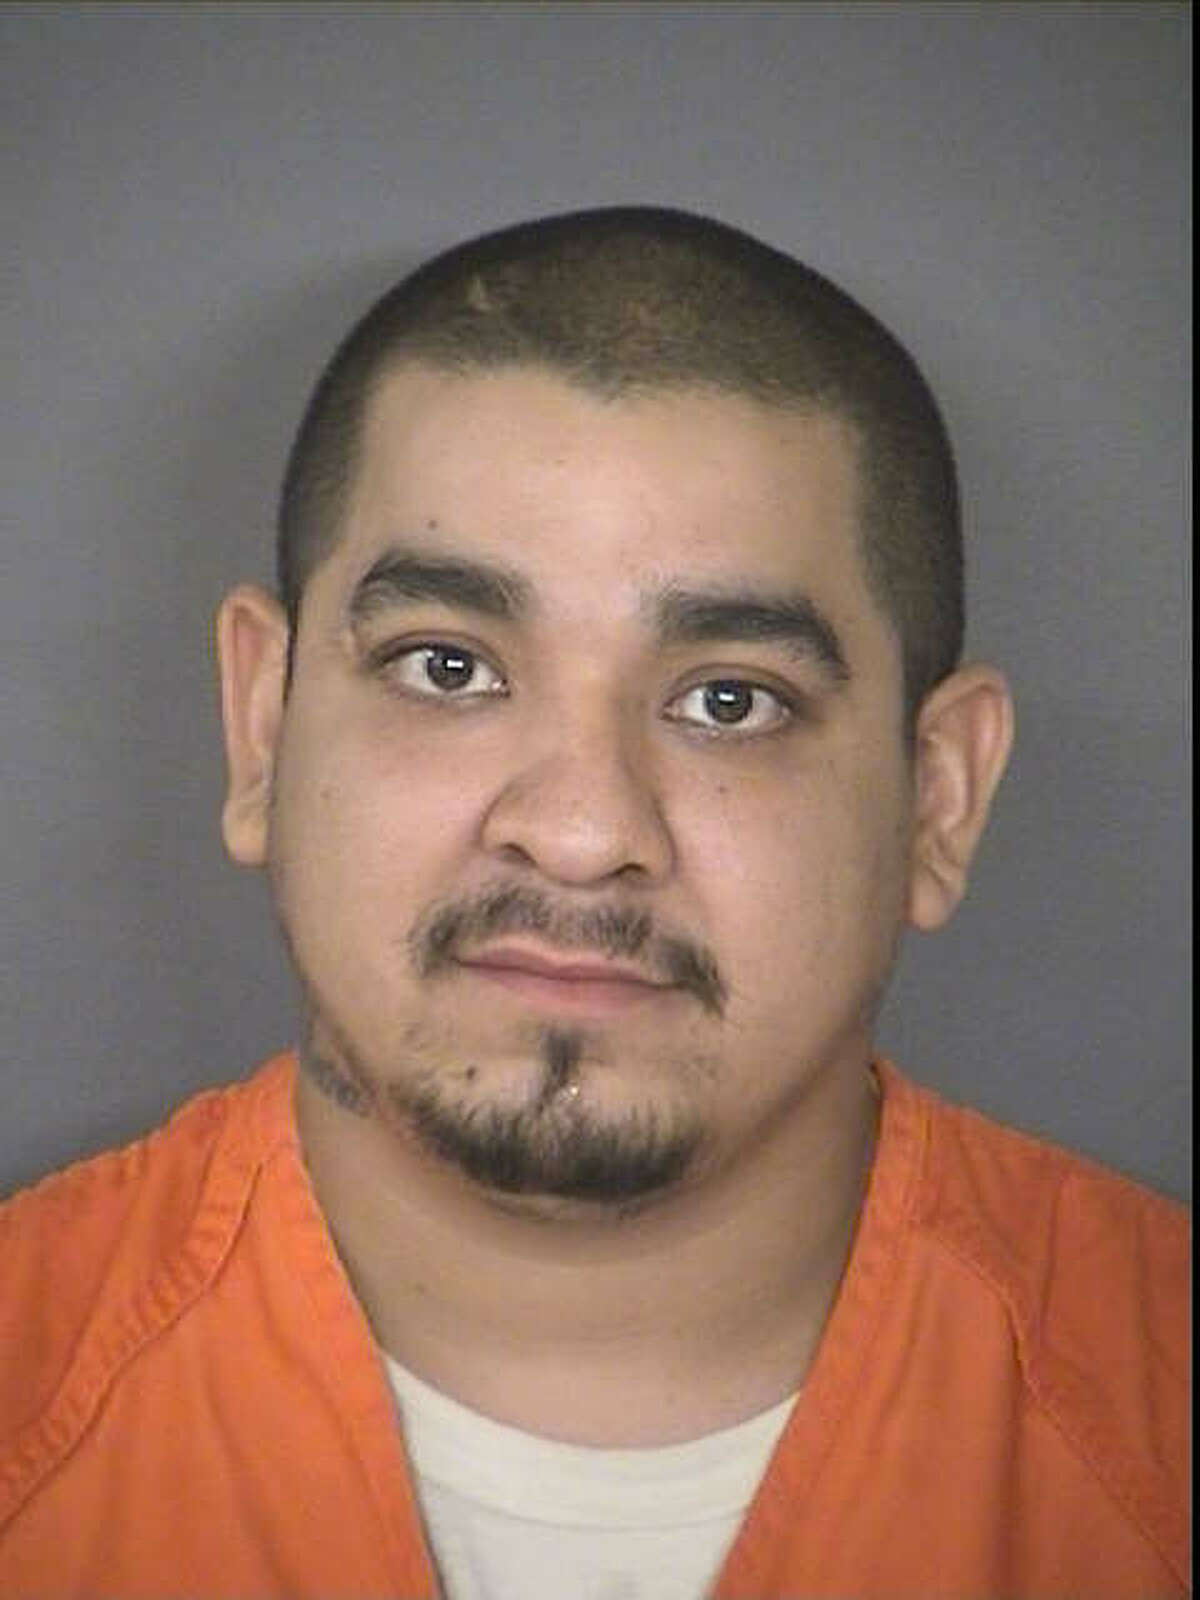 Alejandro Orozco Jr. faces a charge of murder for his alleged role in a crash that claimed the life of a woman Monday night on the Northwest Side.